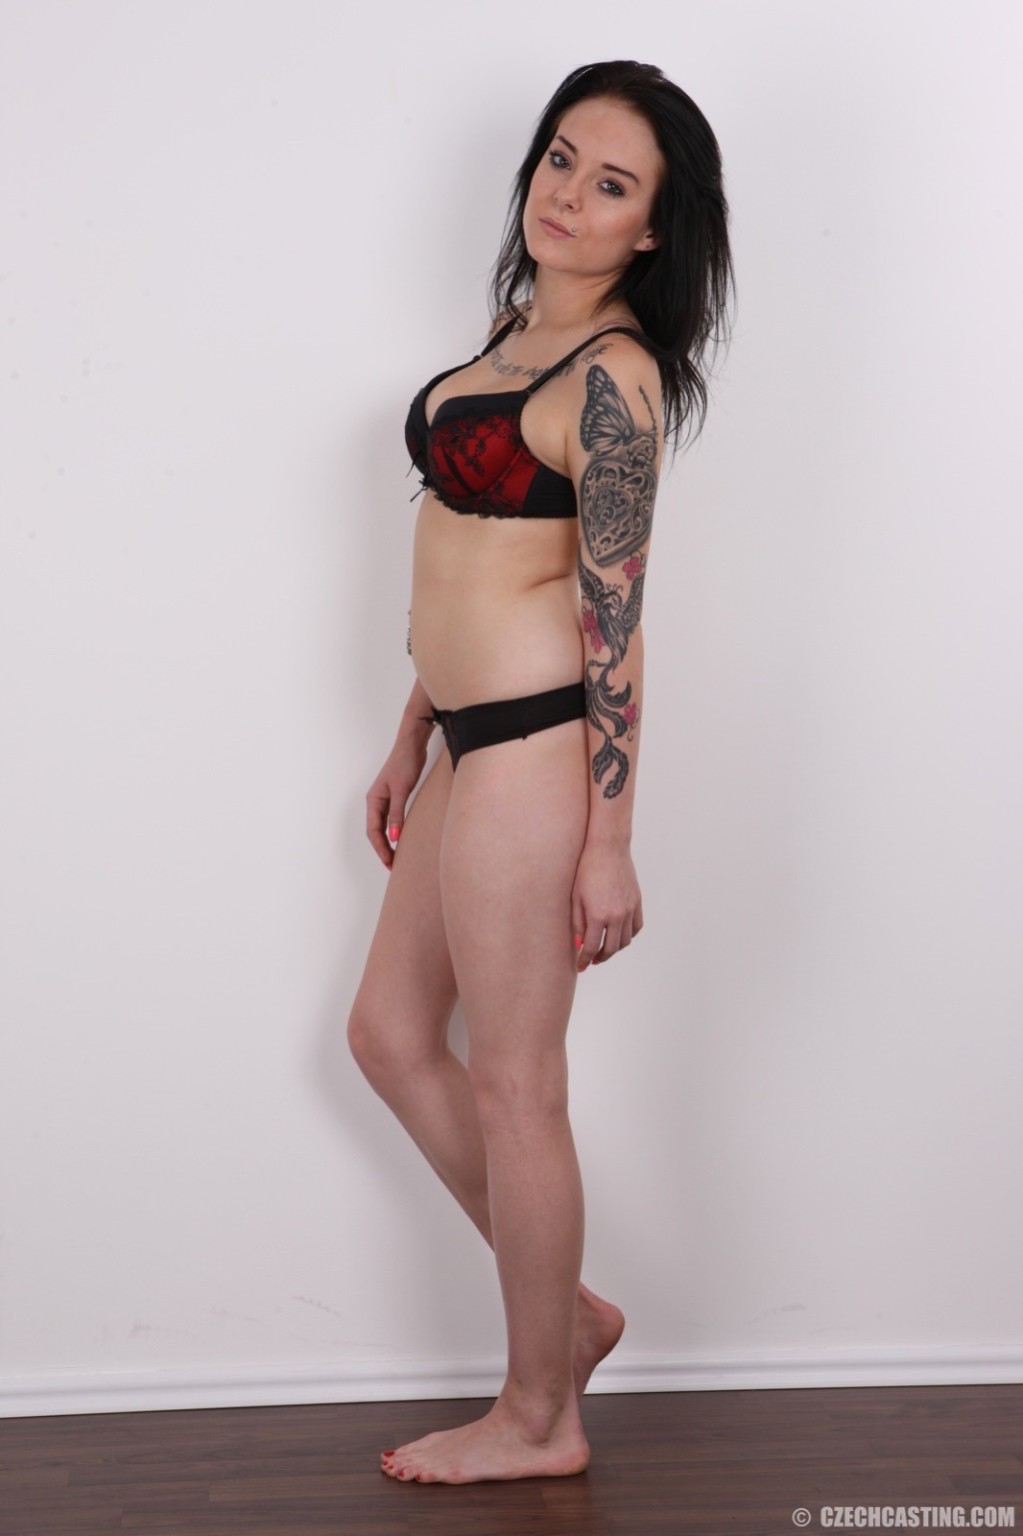 Tattooed brunette poses in casting session #67134097